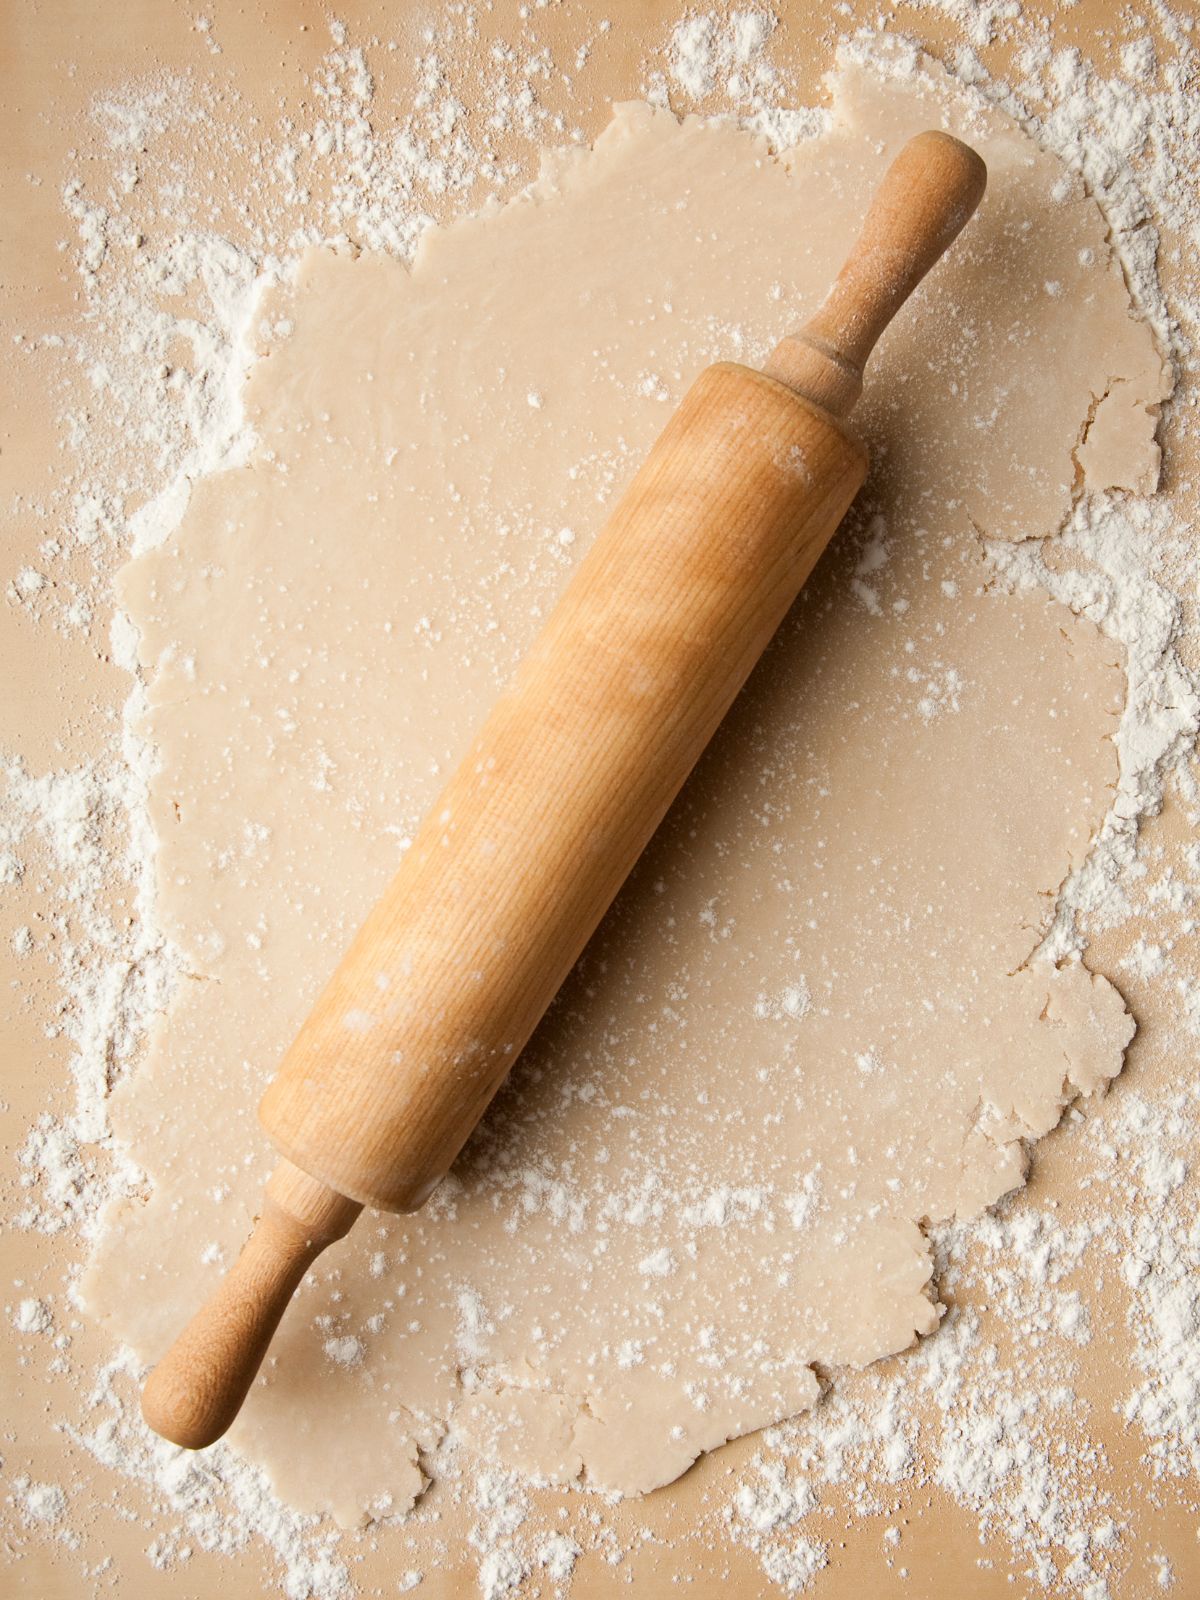 how to make pie crust.